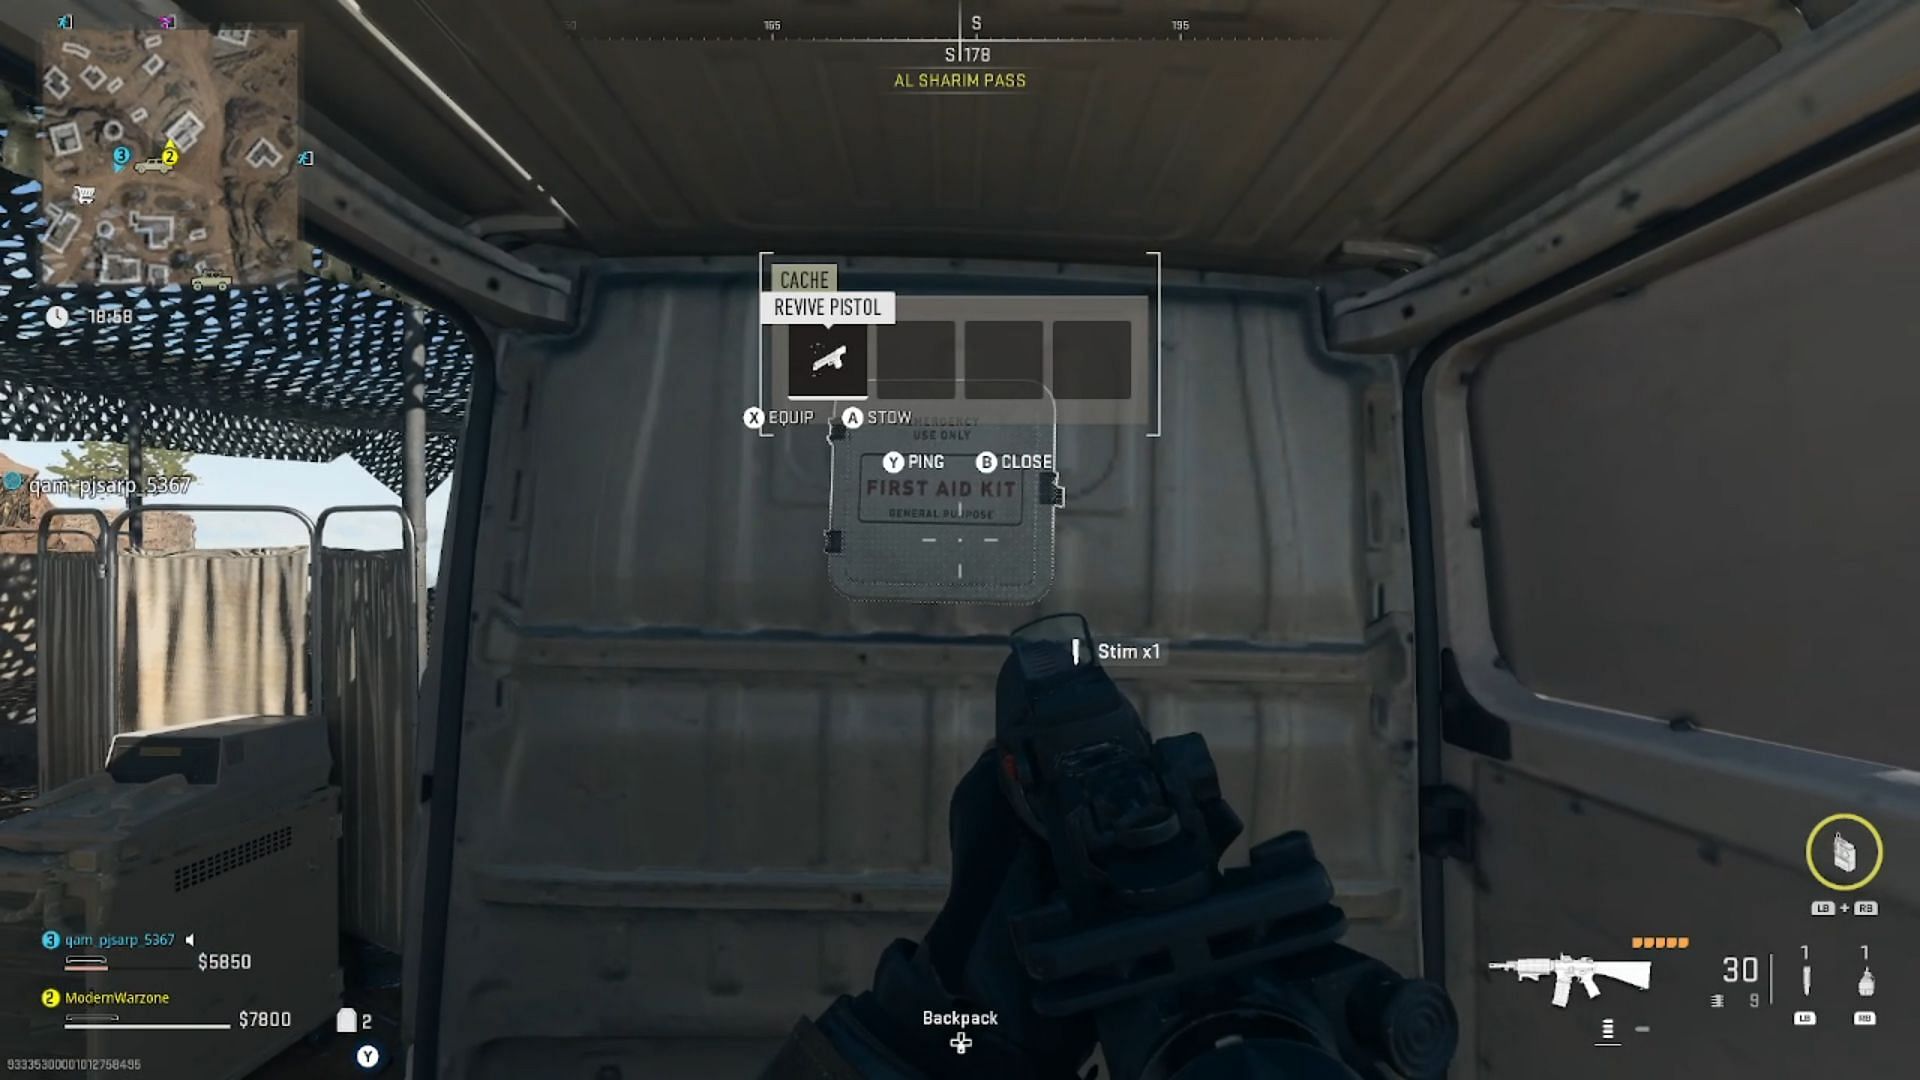 The Revive Pistol being looted from a first aid kit in-game (Image via YouTube/ ModernWarzone)